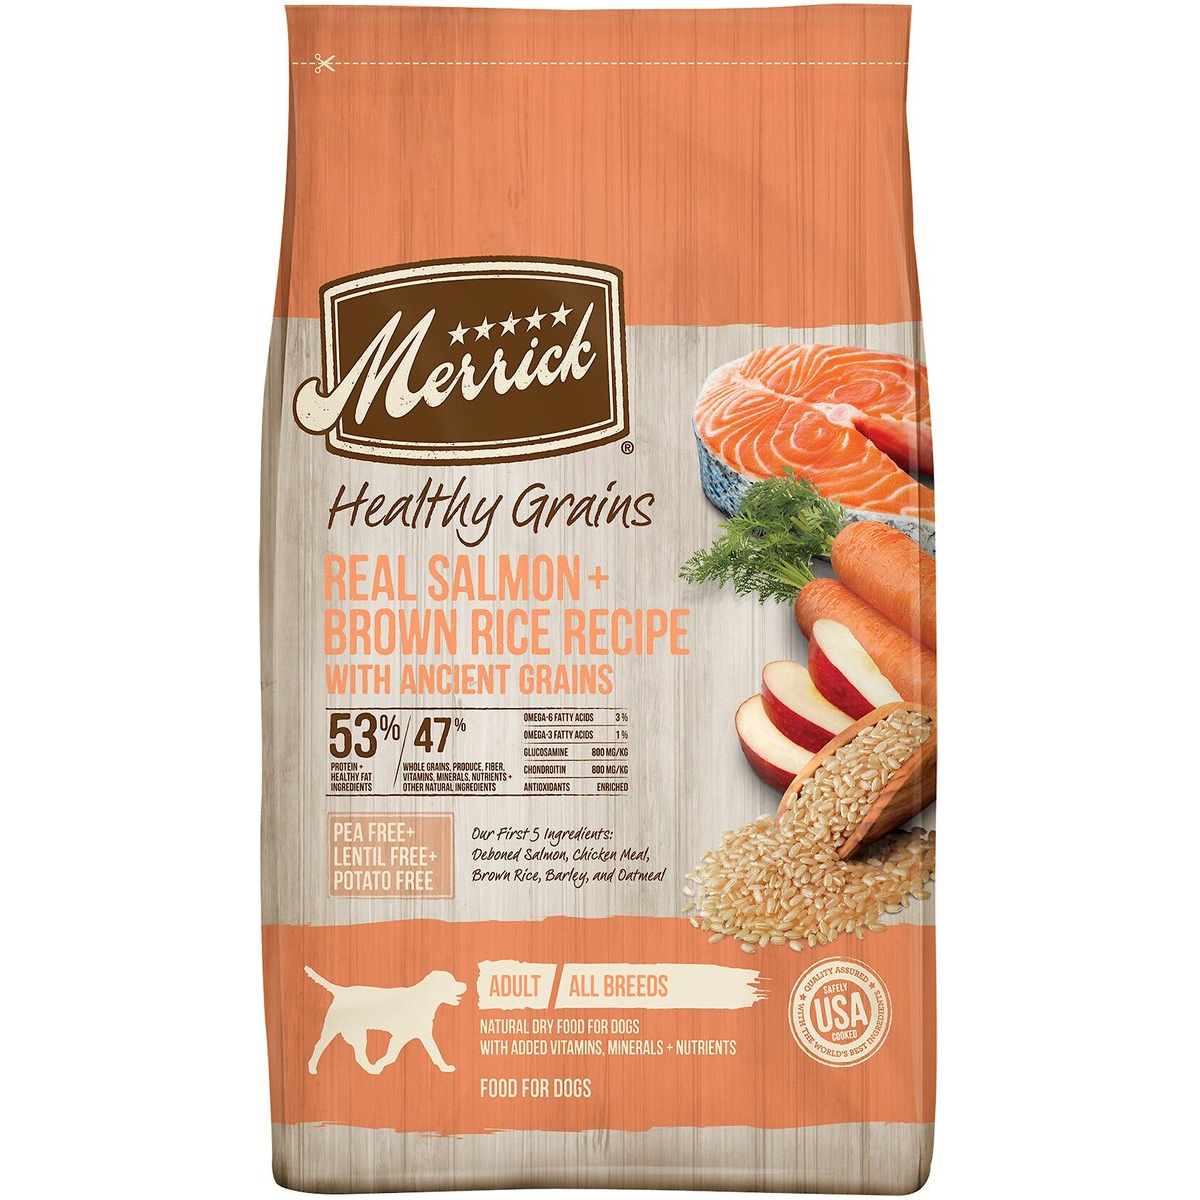 Merrick Healthy Grains Real Salmon & Brown Rice Recipe with Ancient Grains Dry Dog Food